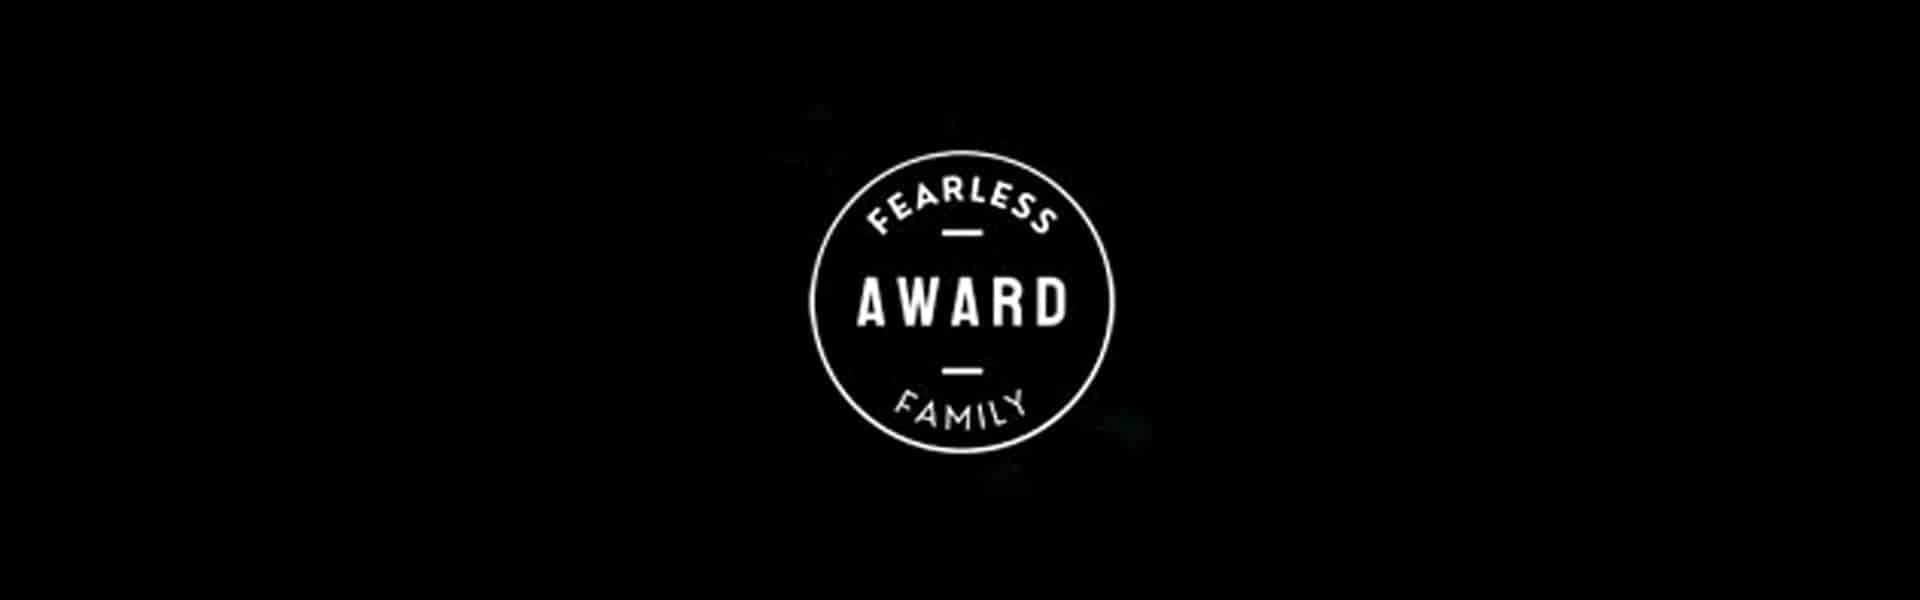 Fearless Family Awards: Drie Awards in ronde 9